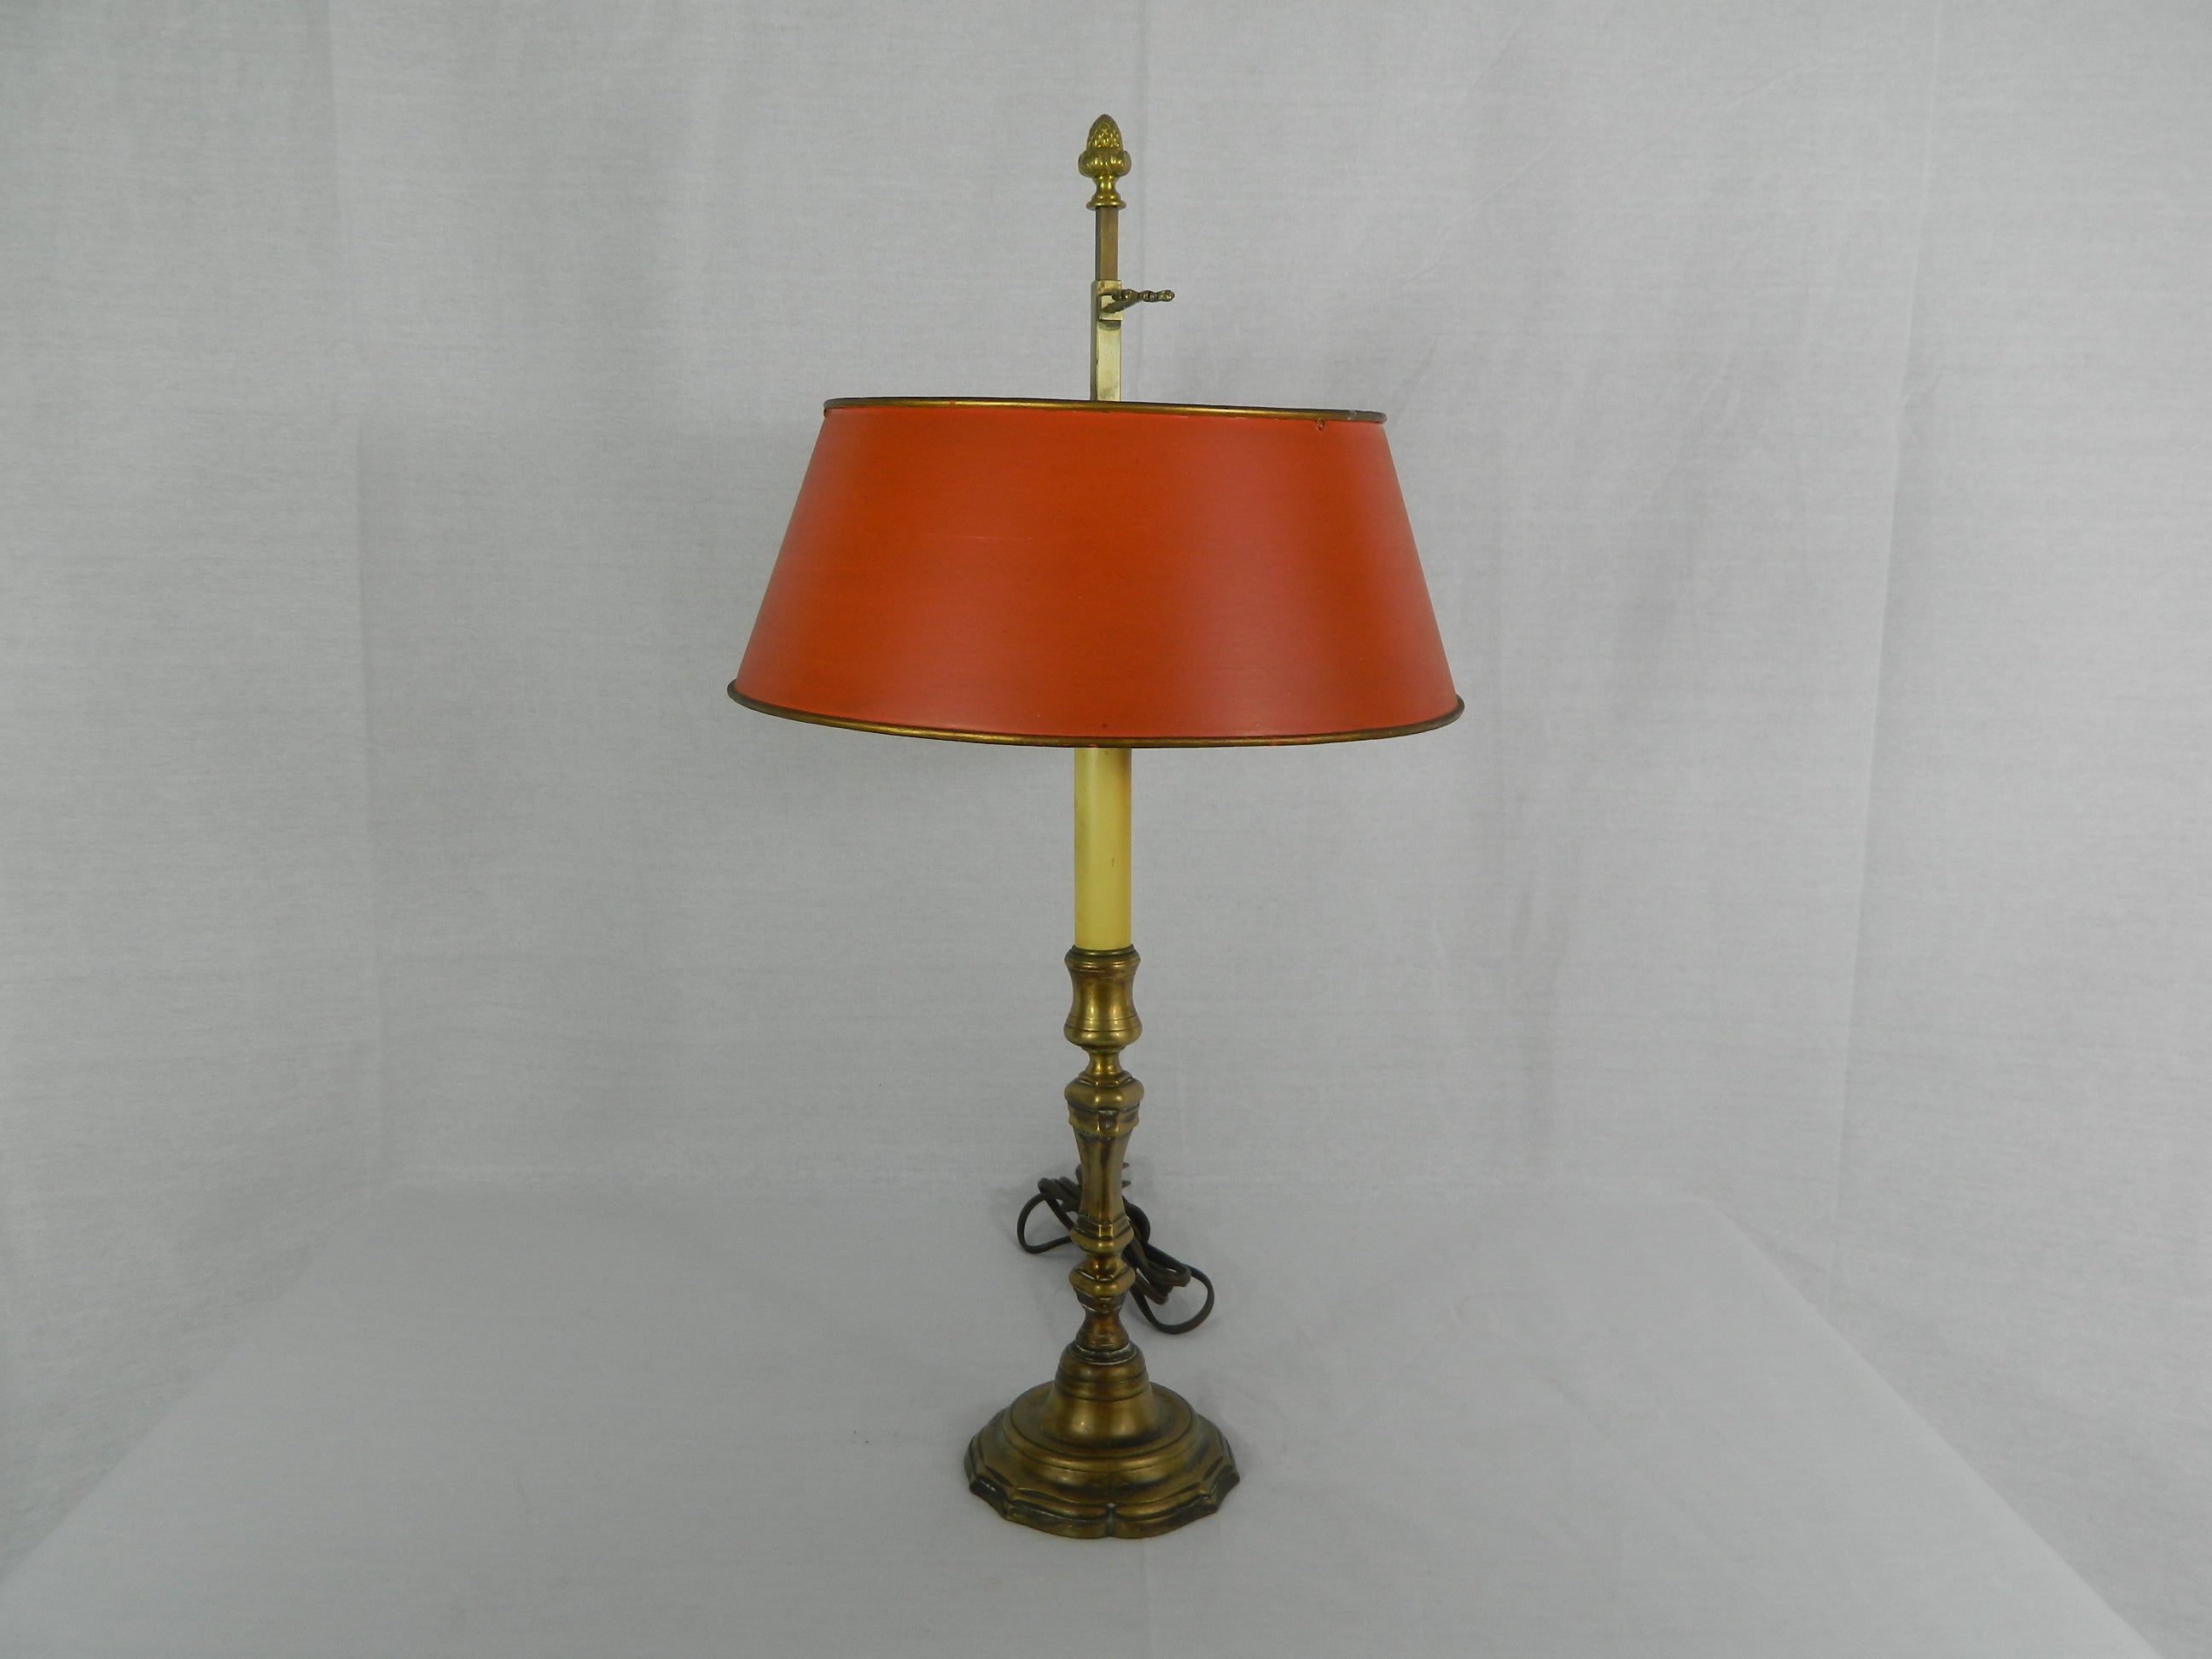 Regence Style Gilt-Metal Candlestick Lamp with a Tin Shade, 19th Century